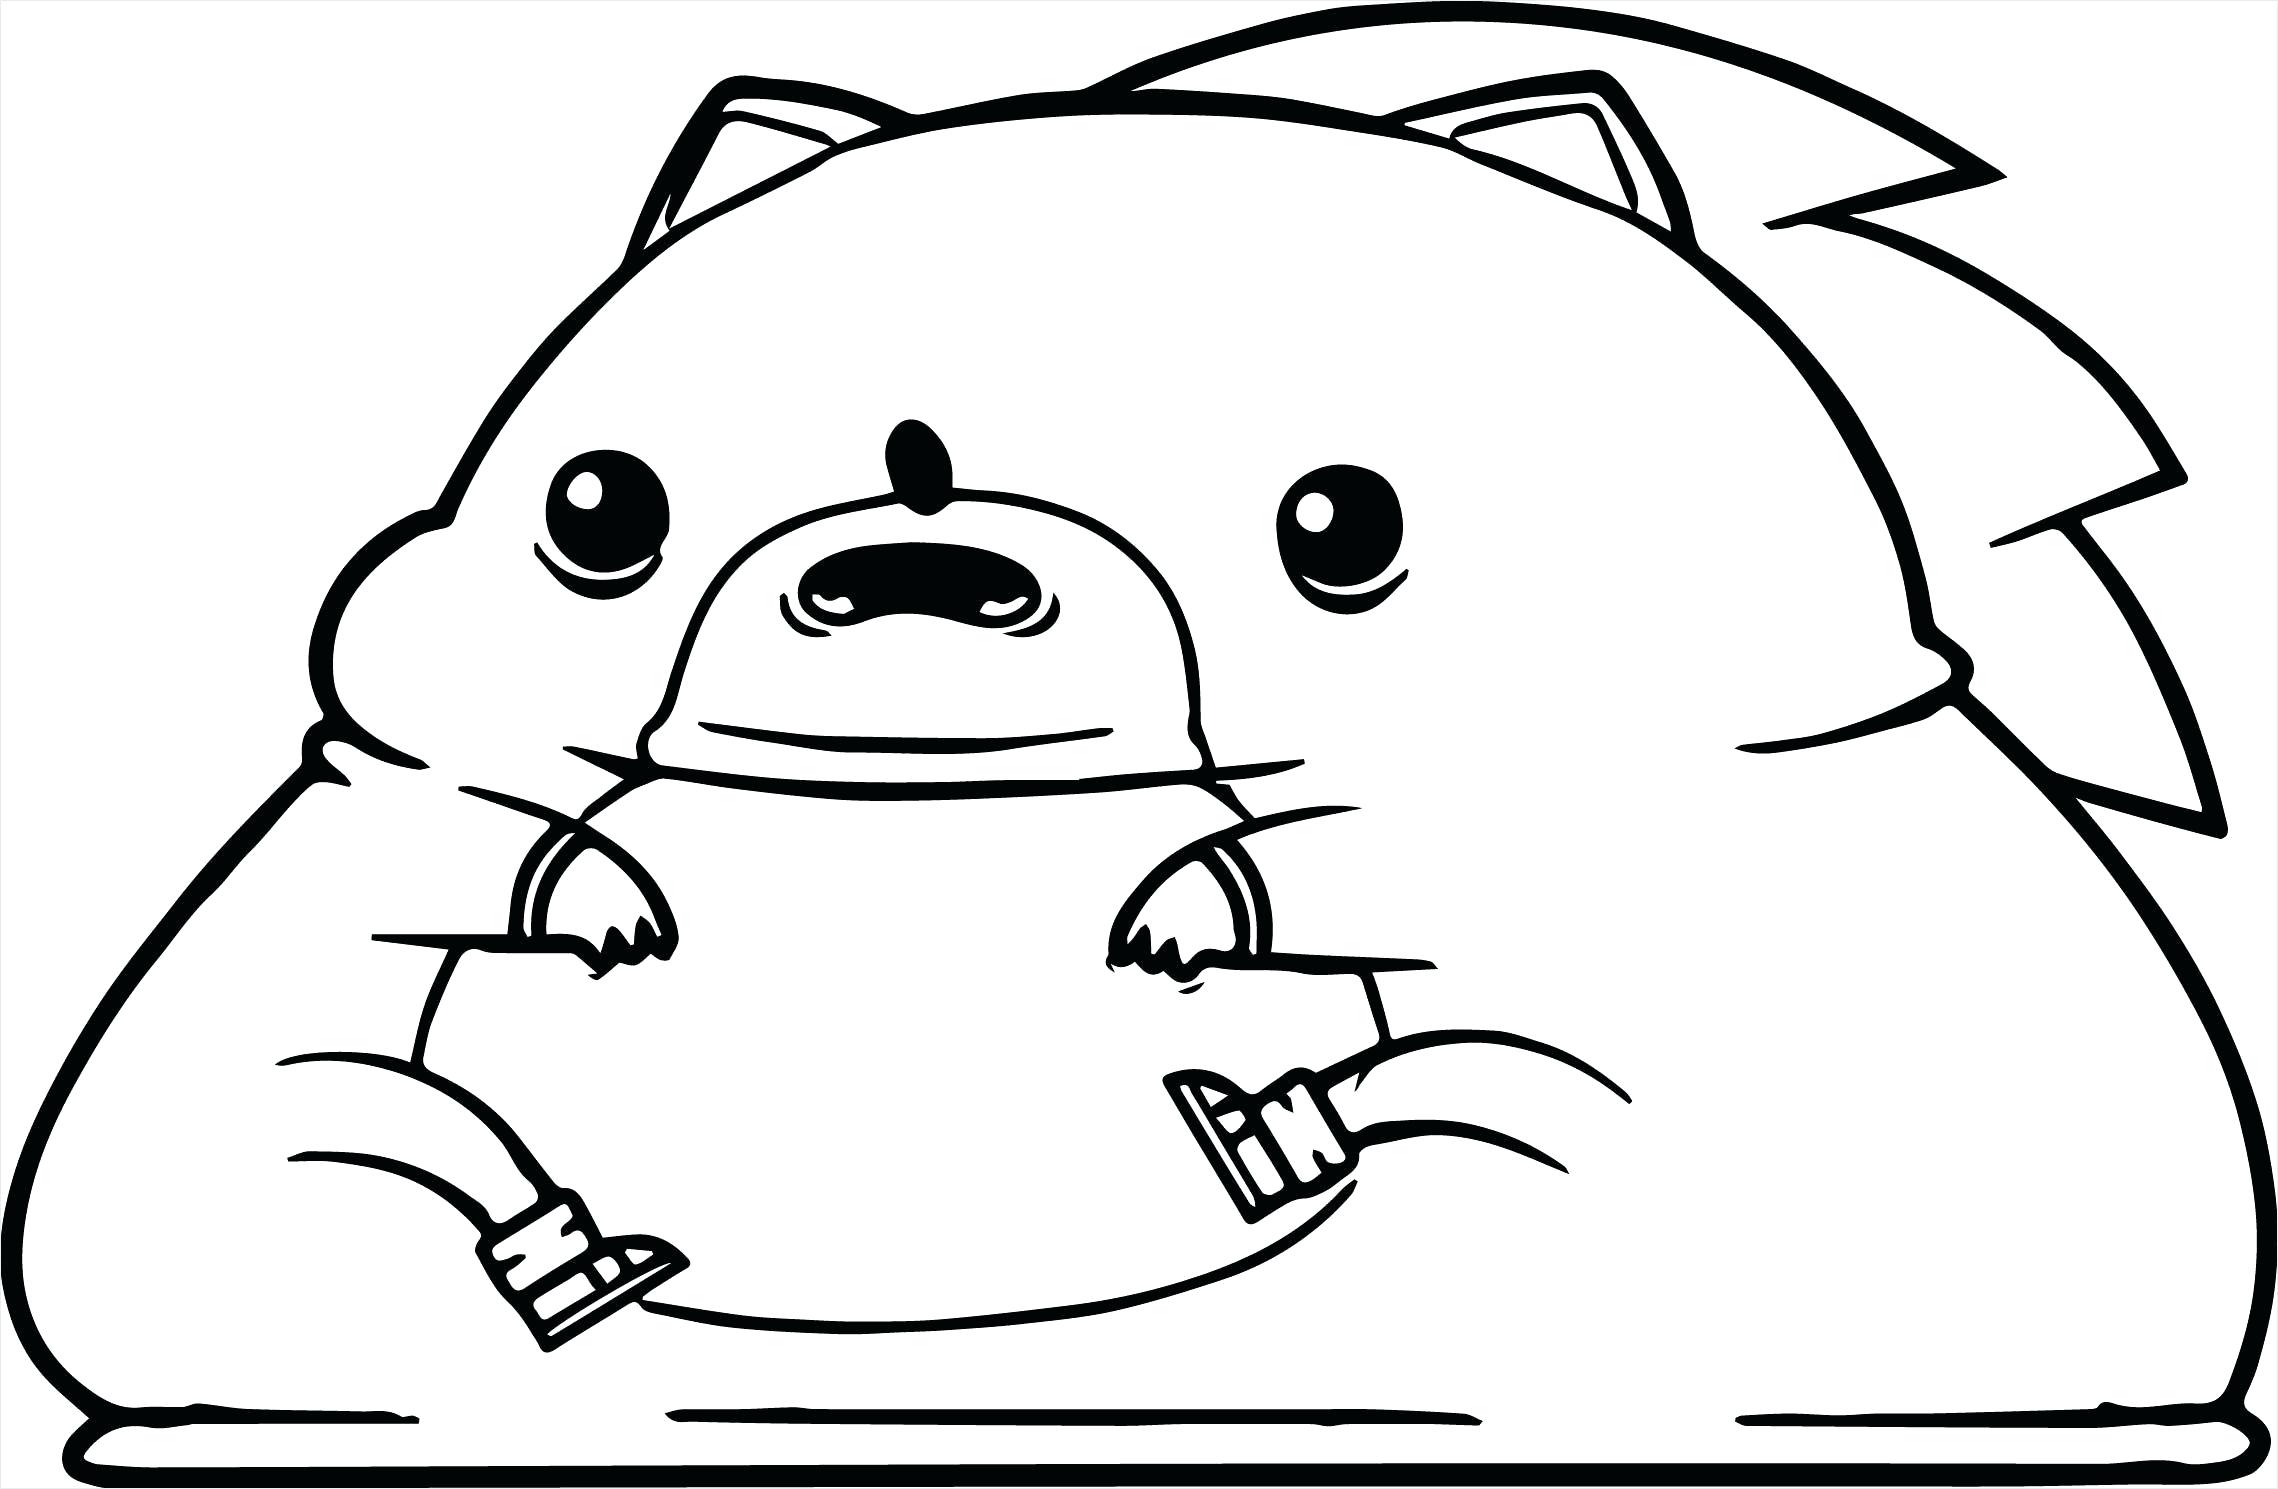 Download Super Fat Sonic Coloring Page - Free Printable Coloring ...